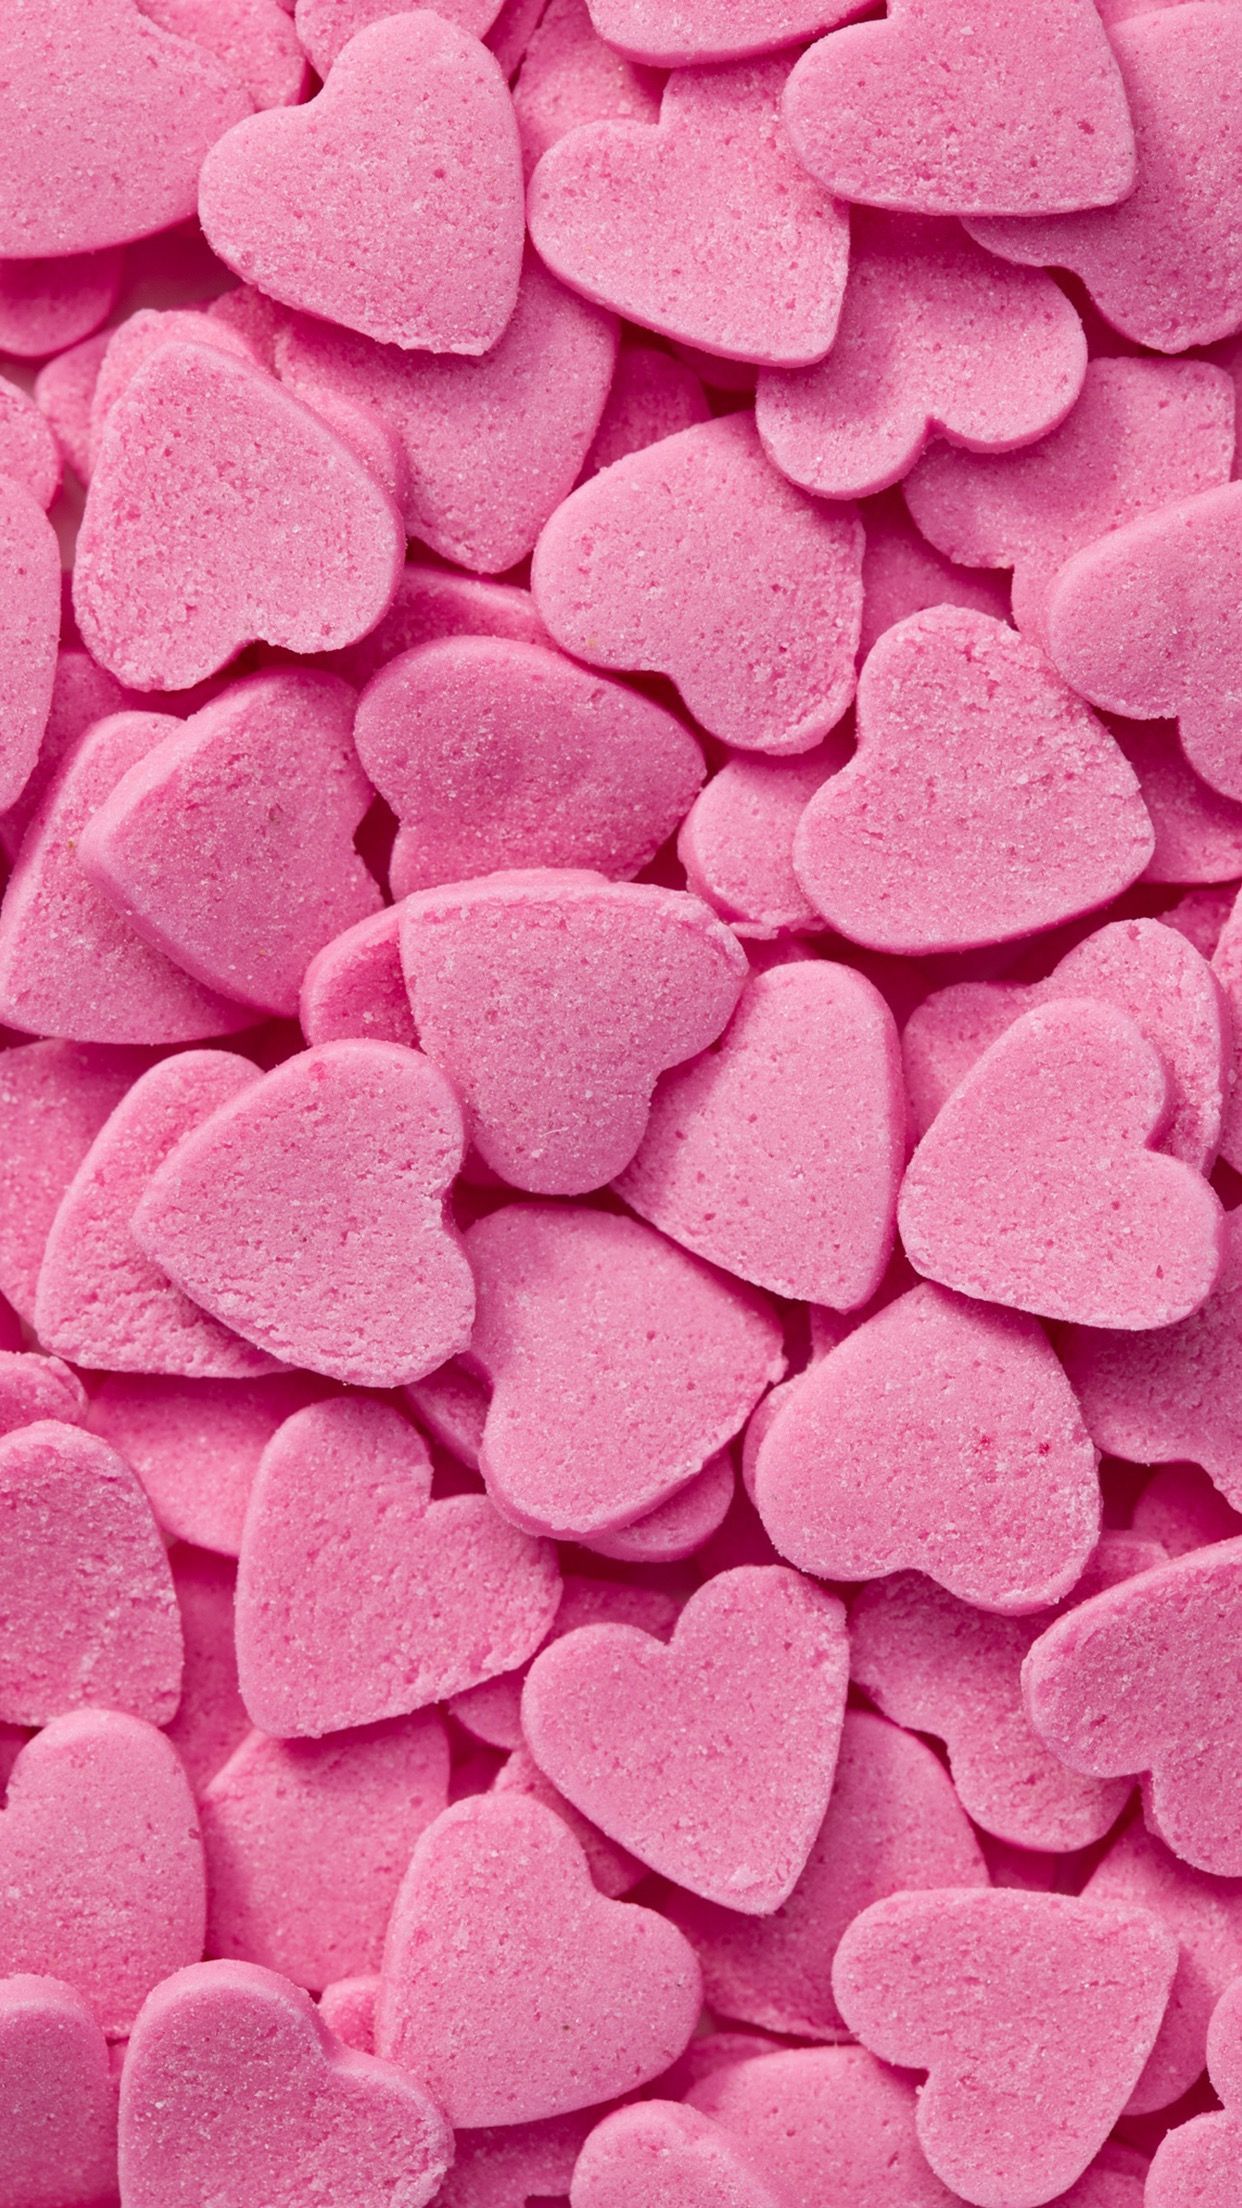 ❤️ Lσvє is iи τнє αiя ❤️. Pink wallpaper iphone, Pink candy, Pink wallpaper